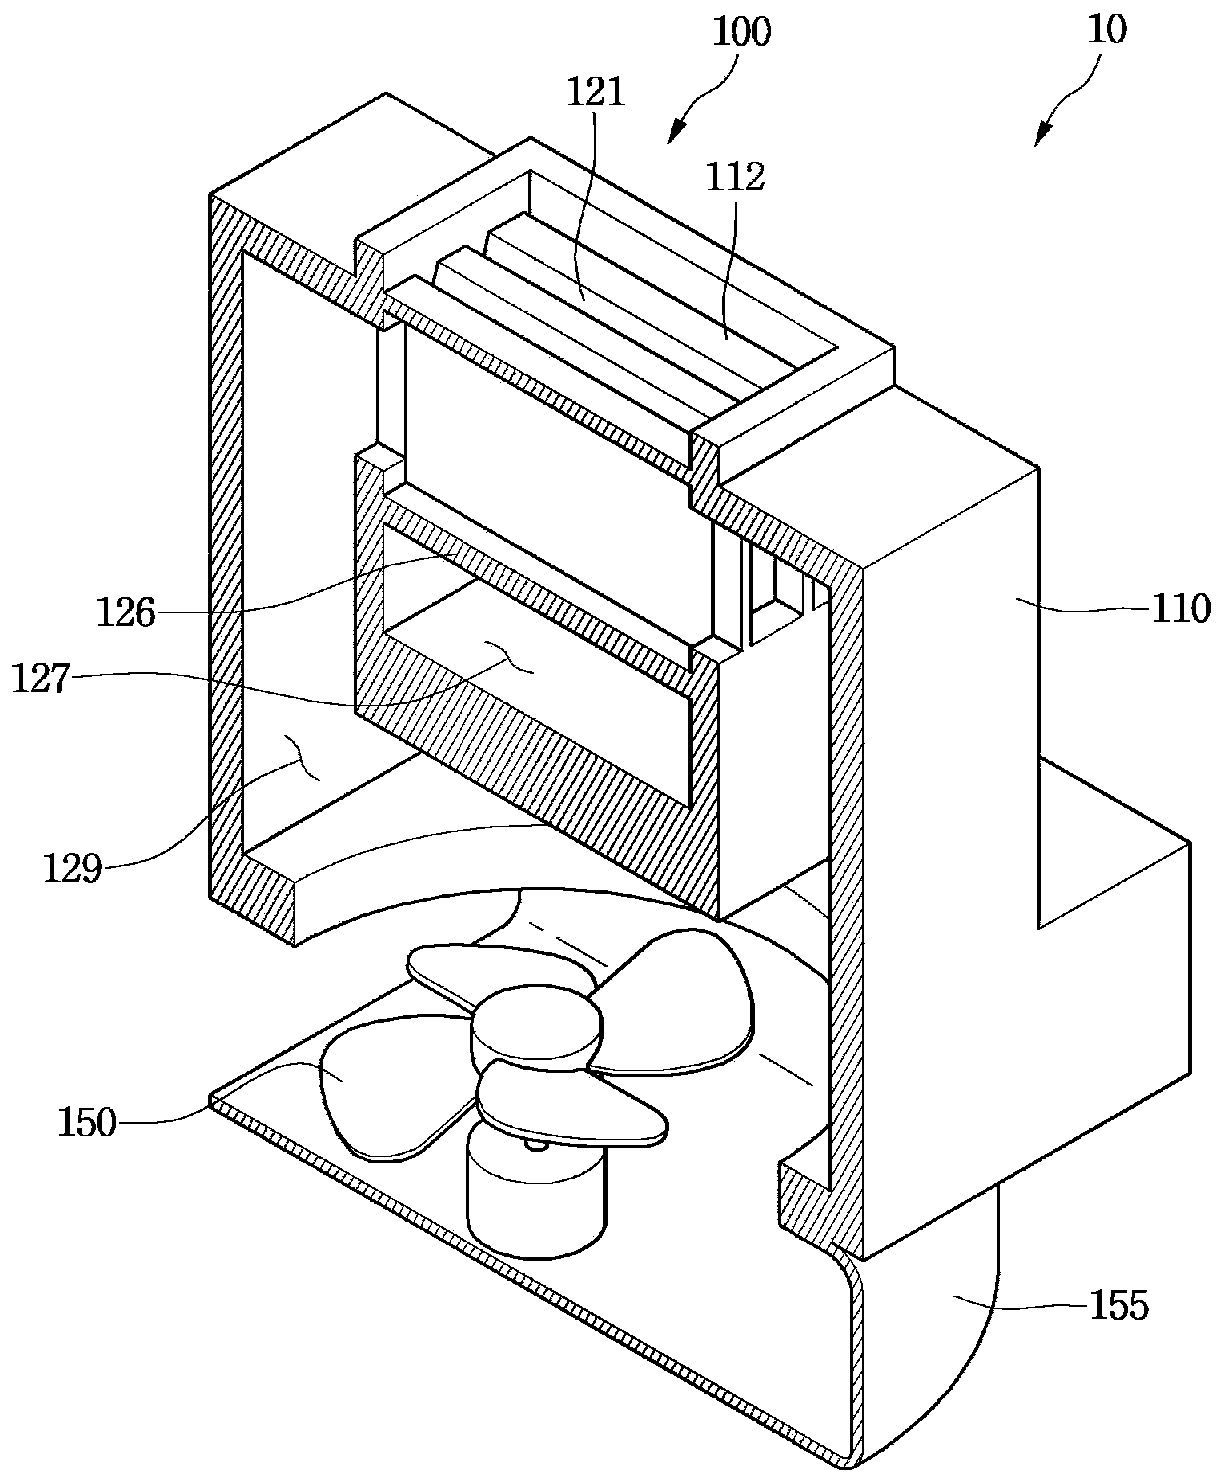 Measuring device and method for planktonic microorganisms